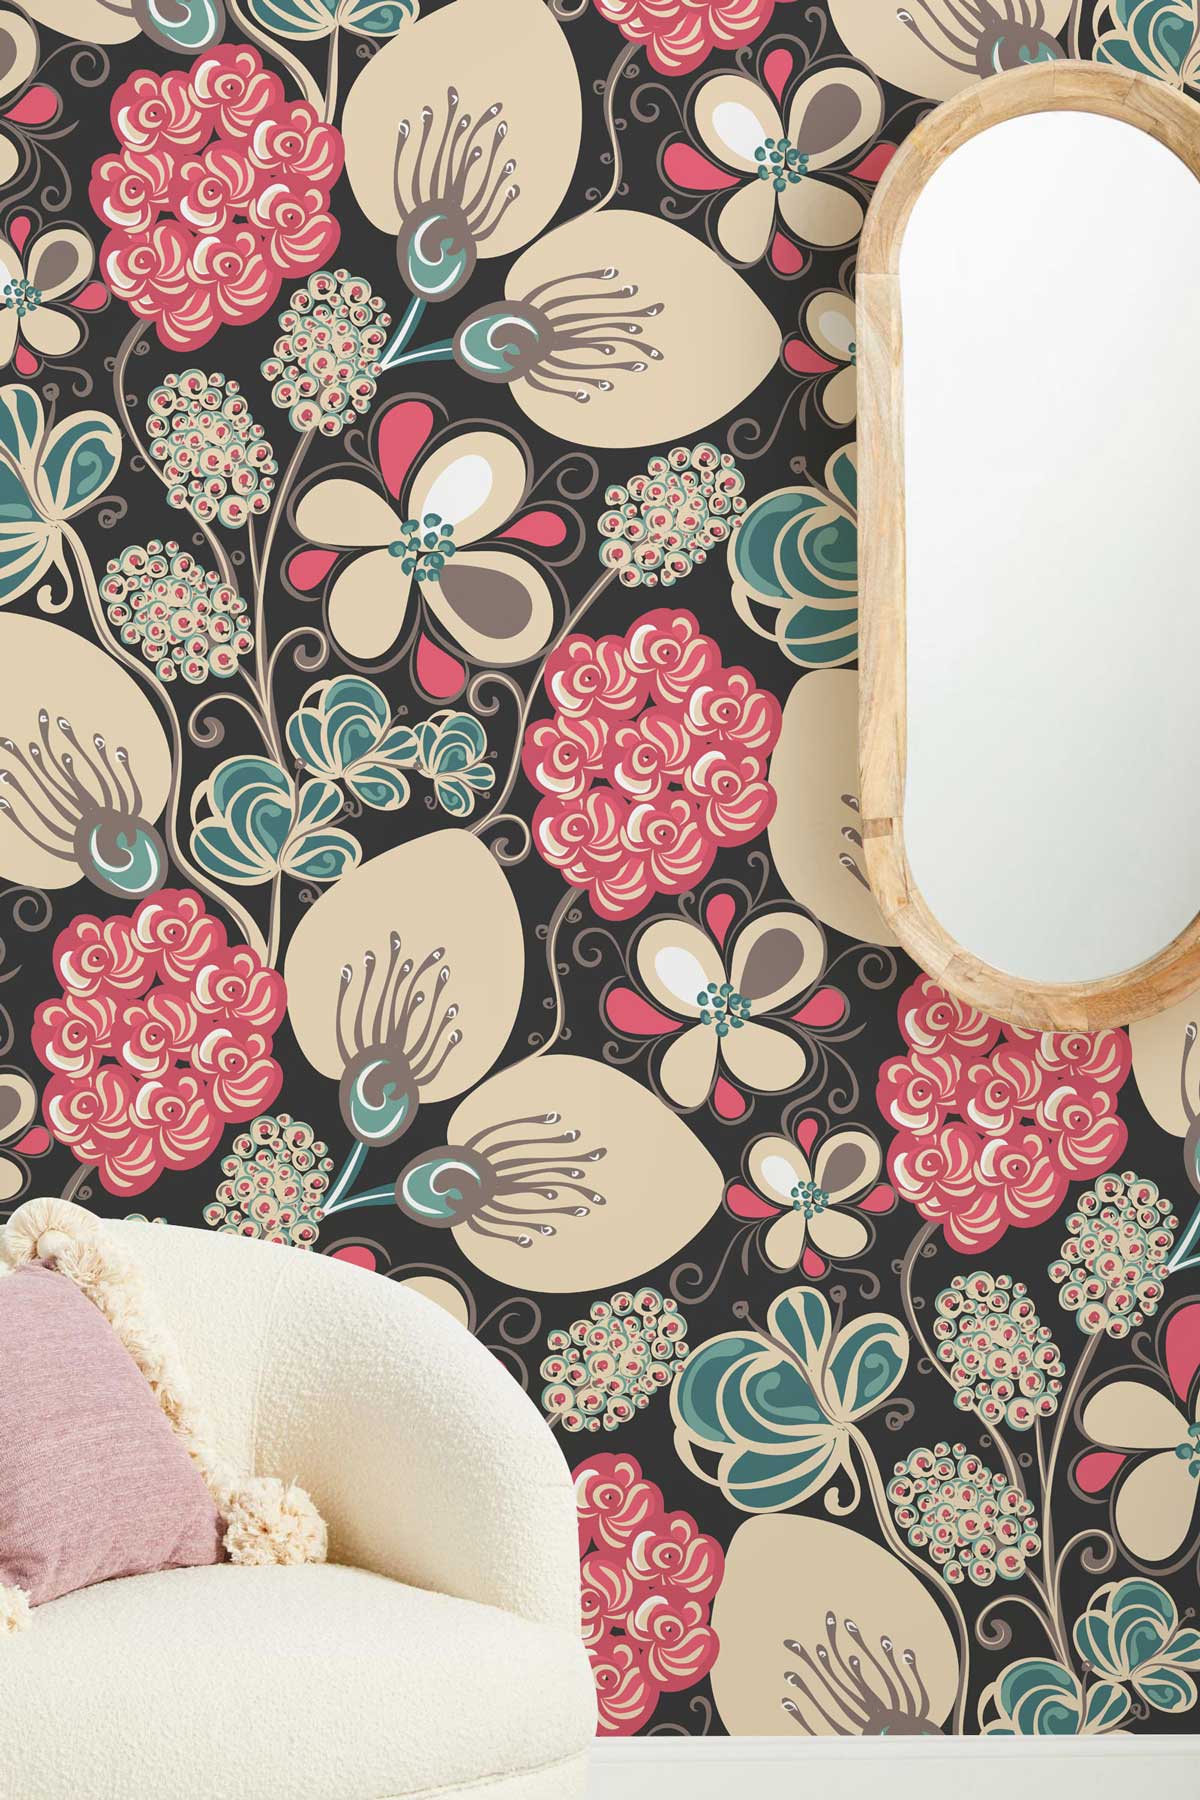 Wallpaper mural with a floral pattern for use in decorating the hallway